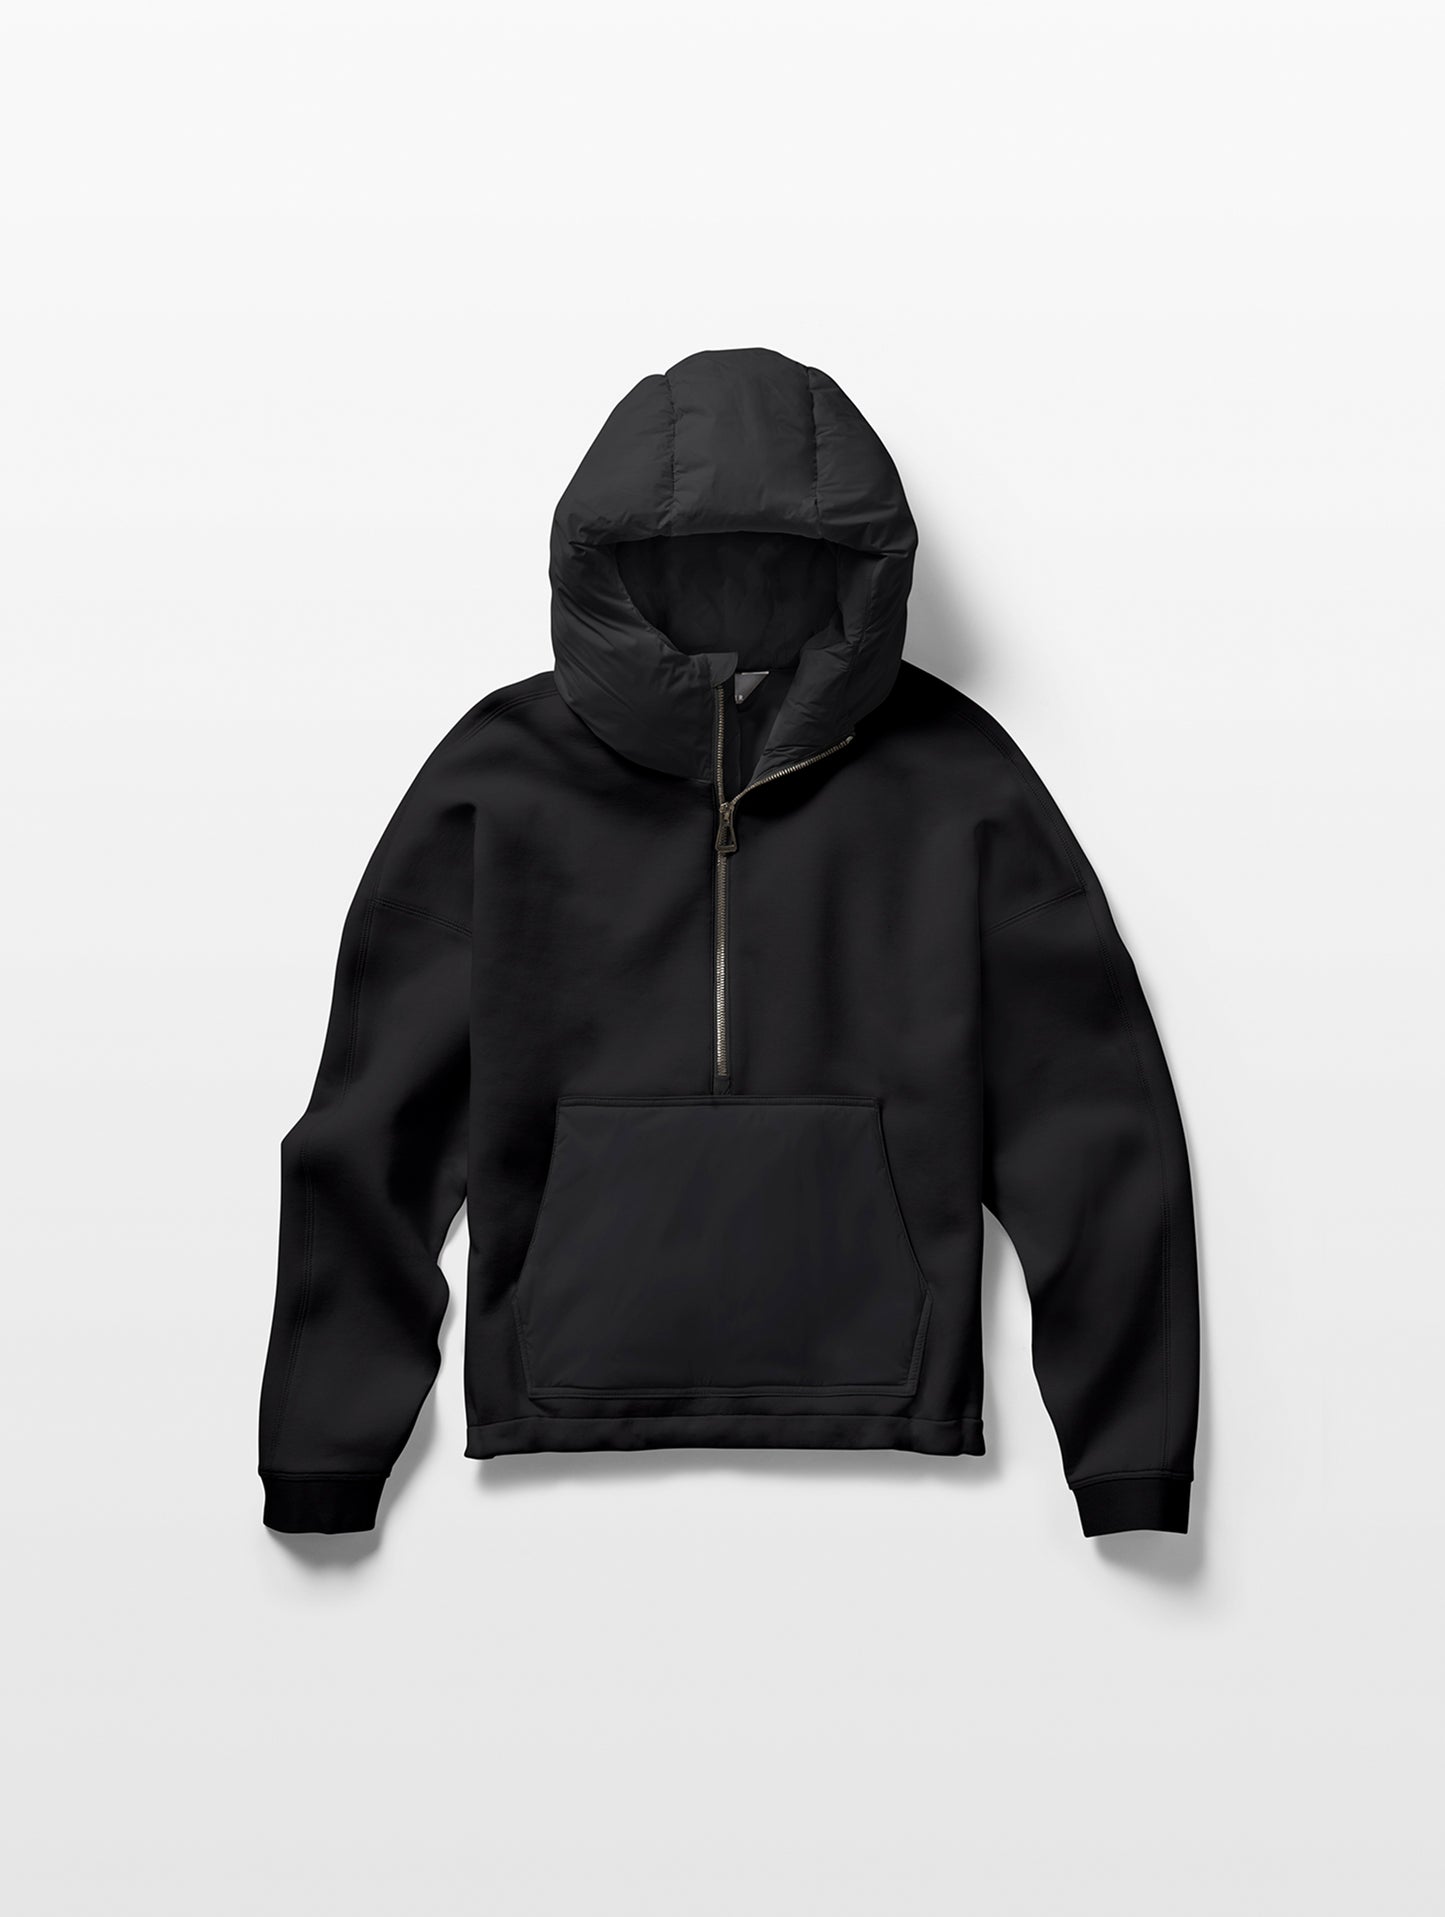 Black Align Hooded Anorak from AETHER Apparel.